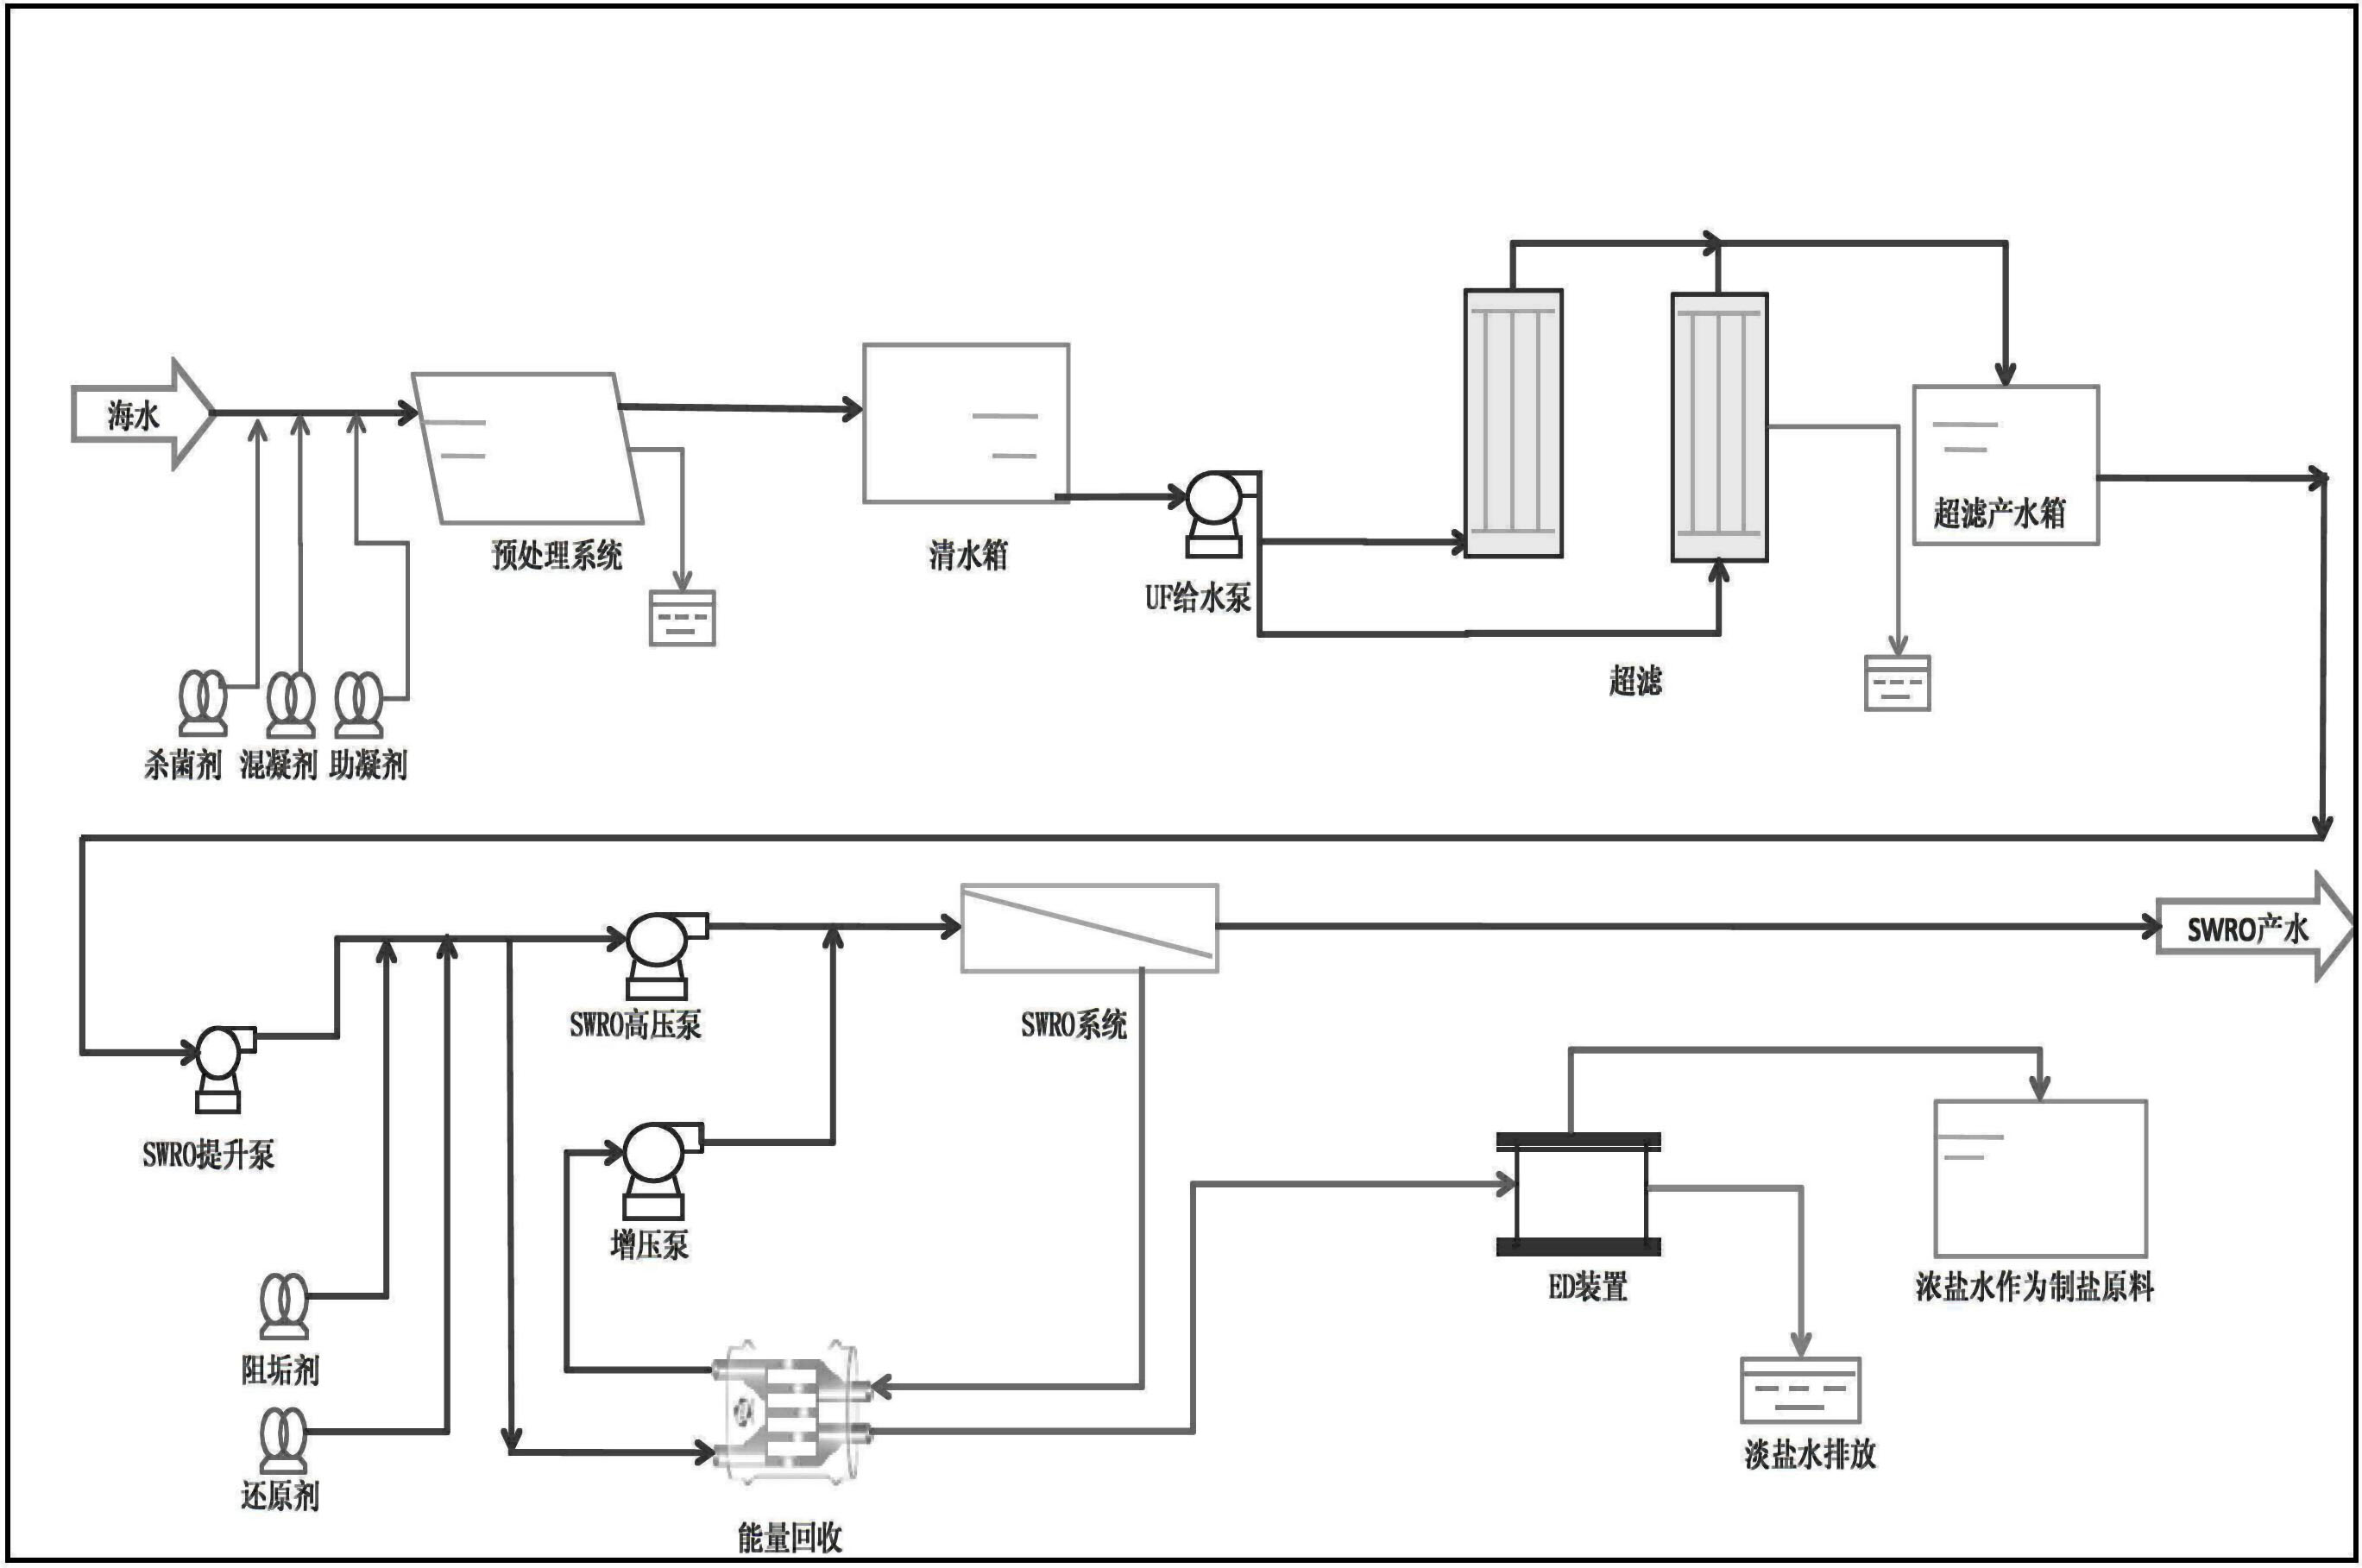 Novel membrane-process sea water desalination and fresh water and salt preparation system and technique